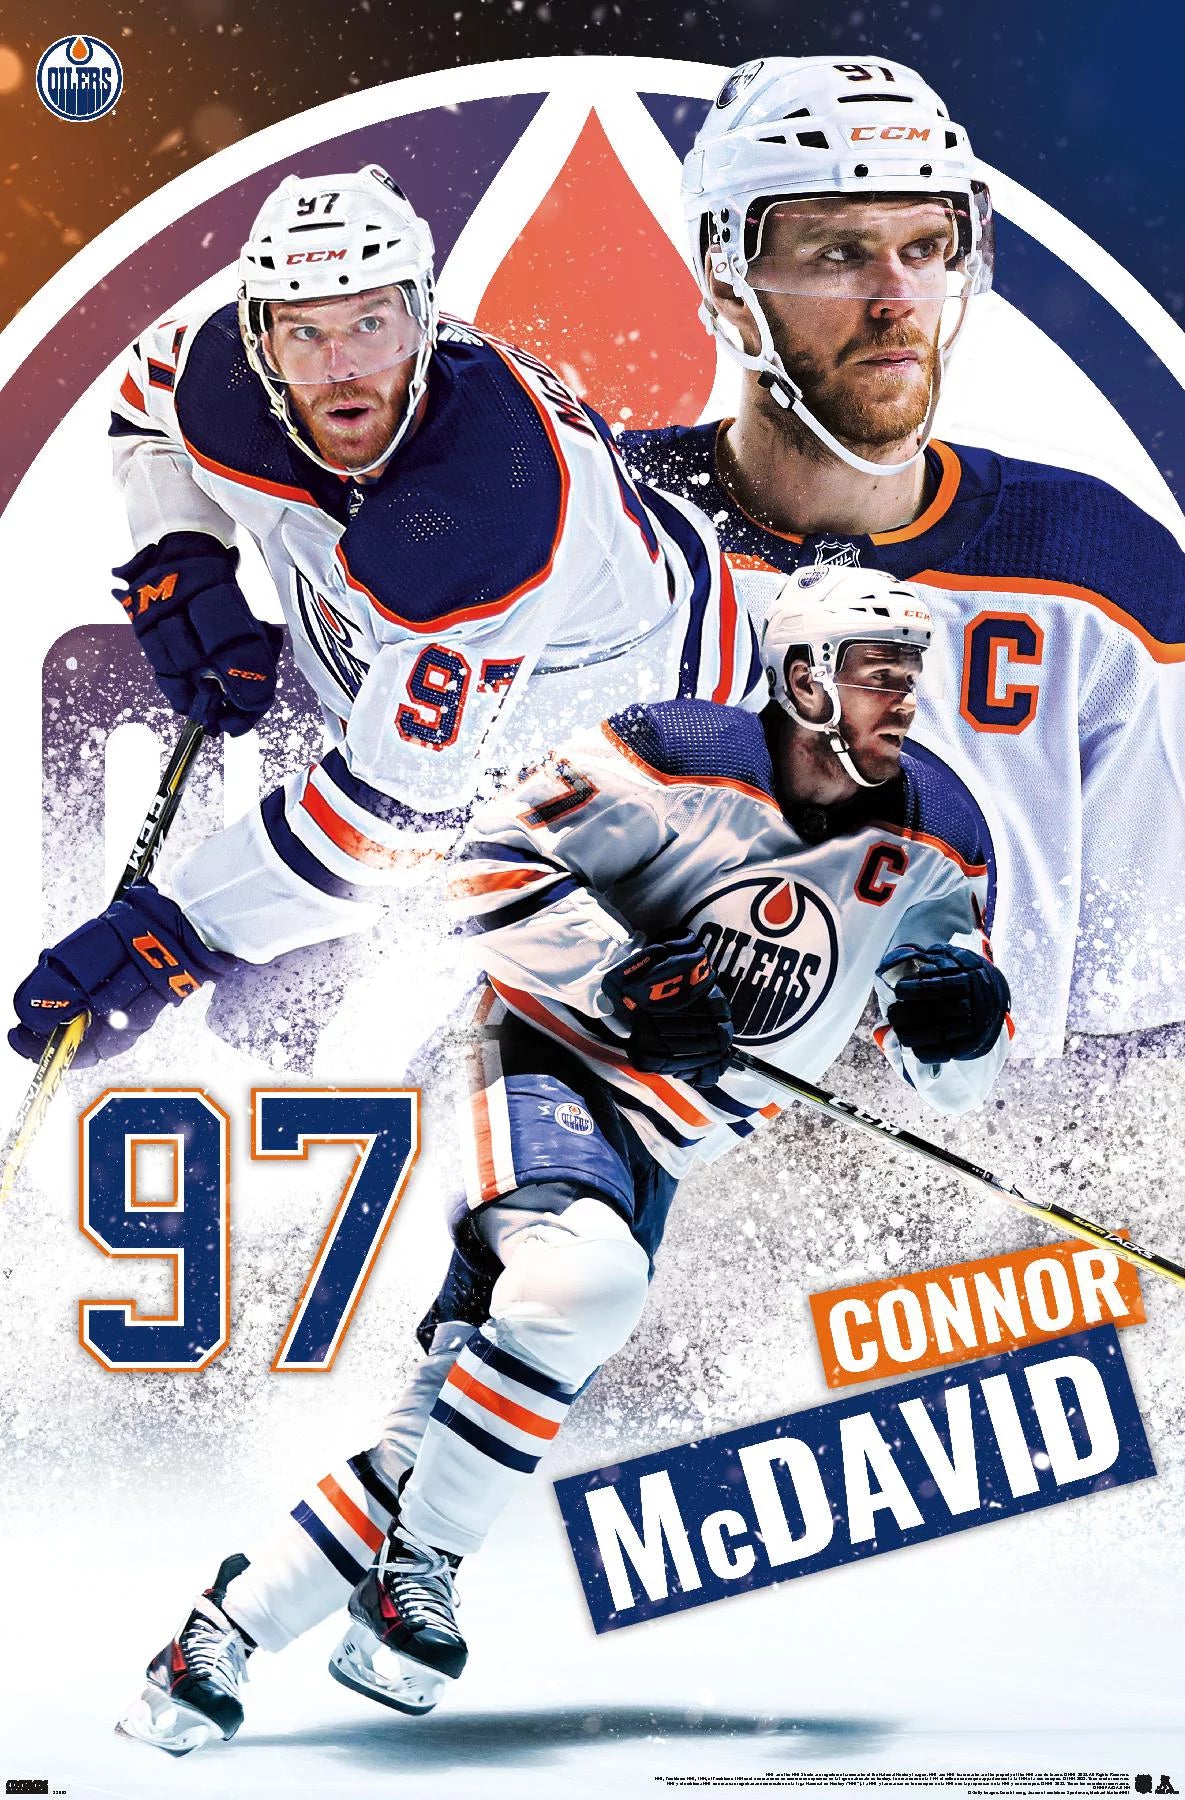 Connor Mcdavid Edmonton Oilers NHL Captain Patch Classic White Away Adidas Player Jersey